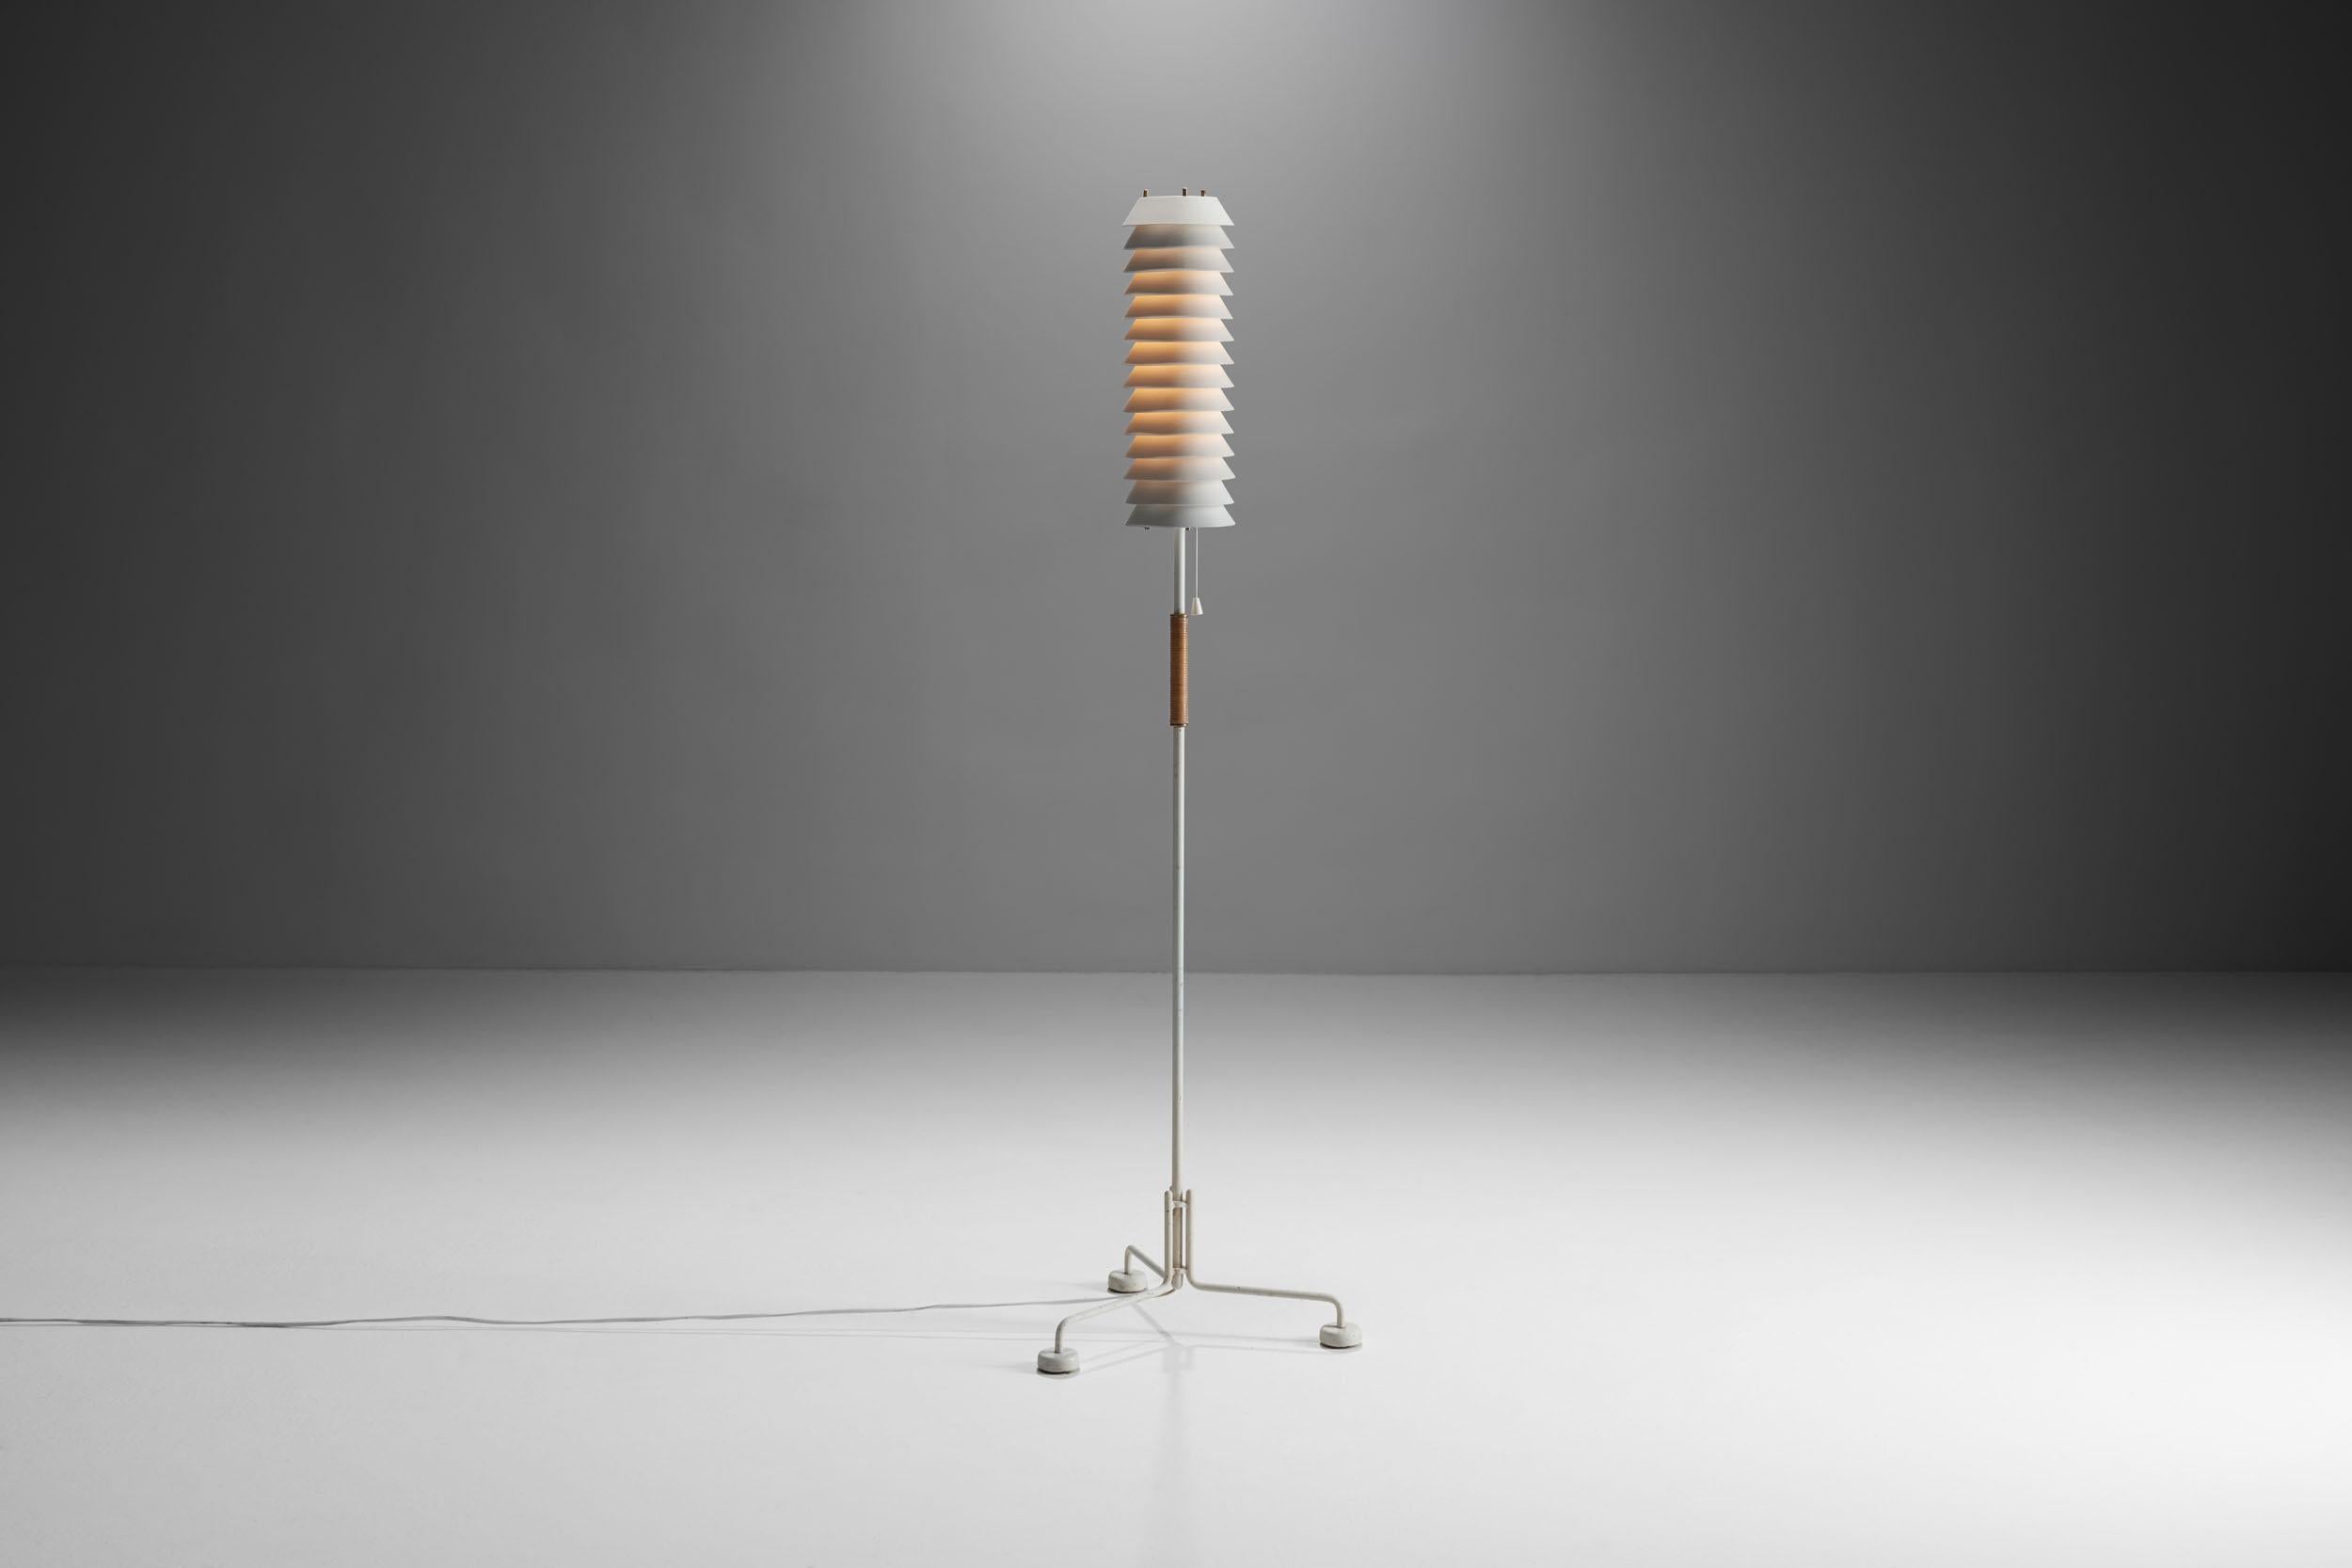 Designed in 1955, this Maija Mehiläinen (Maya the Bee) floor lamp is a simple, yet elegant piece. Tapiovaara's inspiration for this household lamp came from Maya the Bee herself, a friendly character from a 1912 German children’s book, that was also